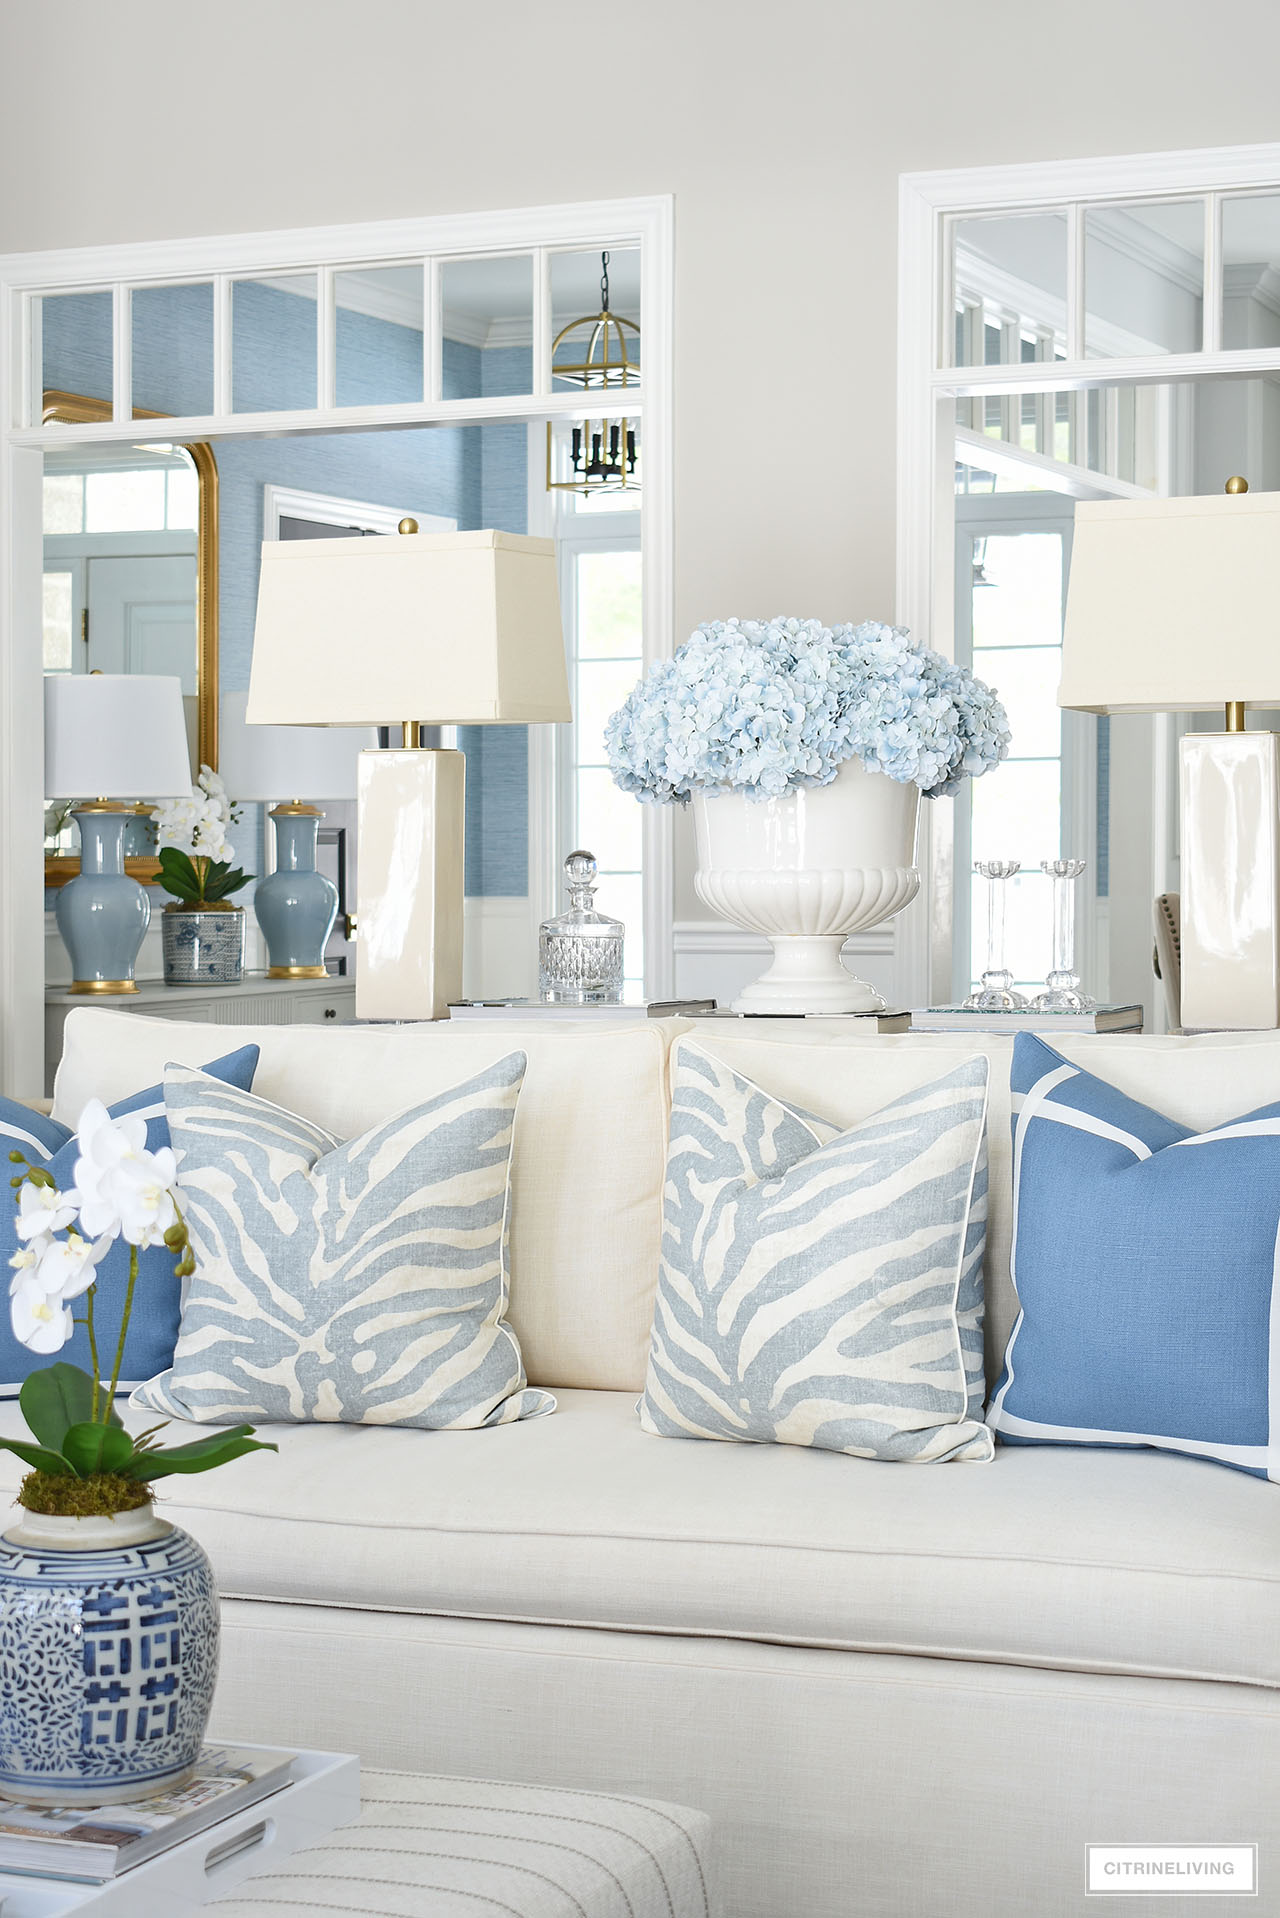 Living room decorated for spring with large light blue faux hydrangea arrangement.